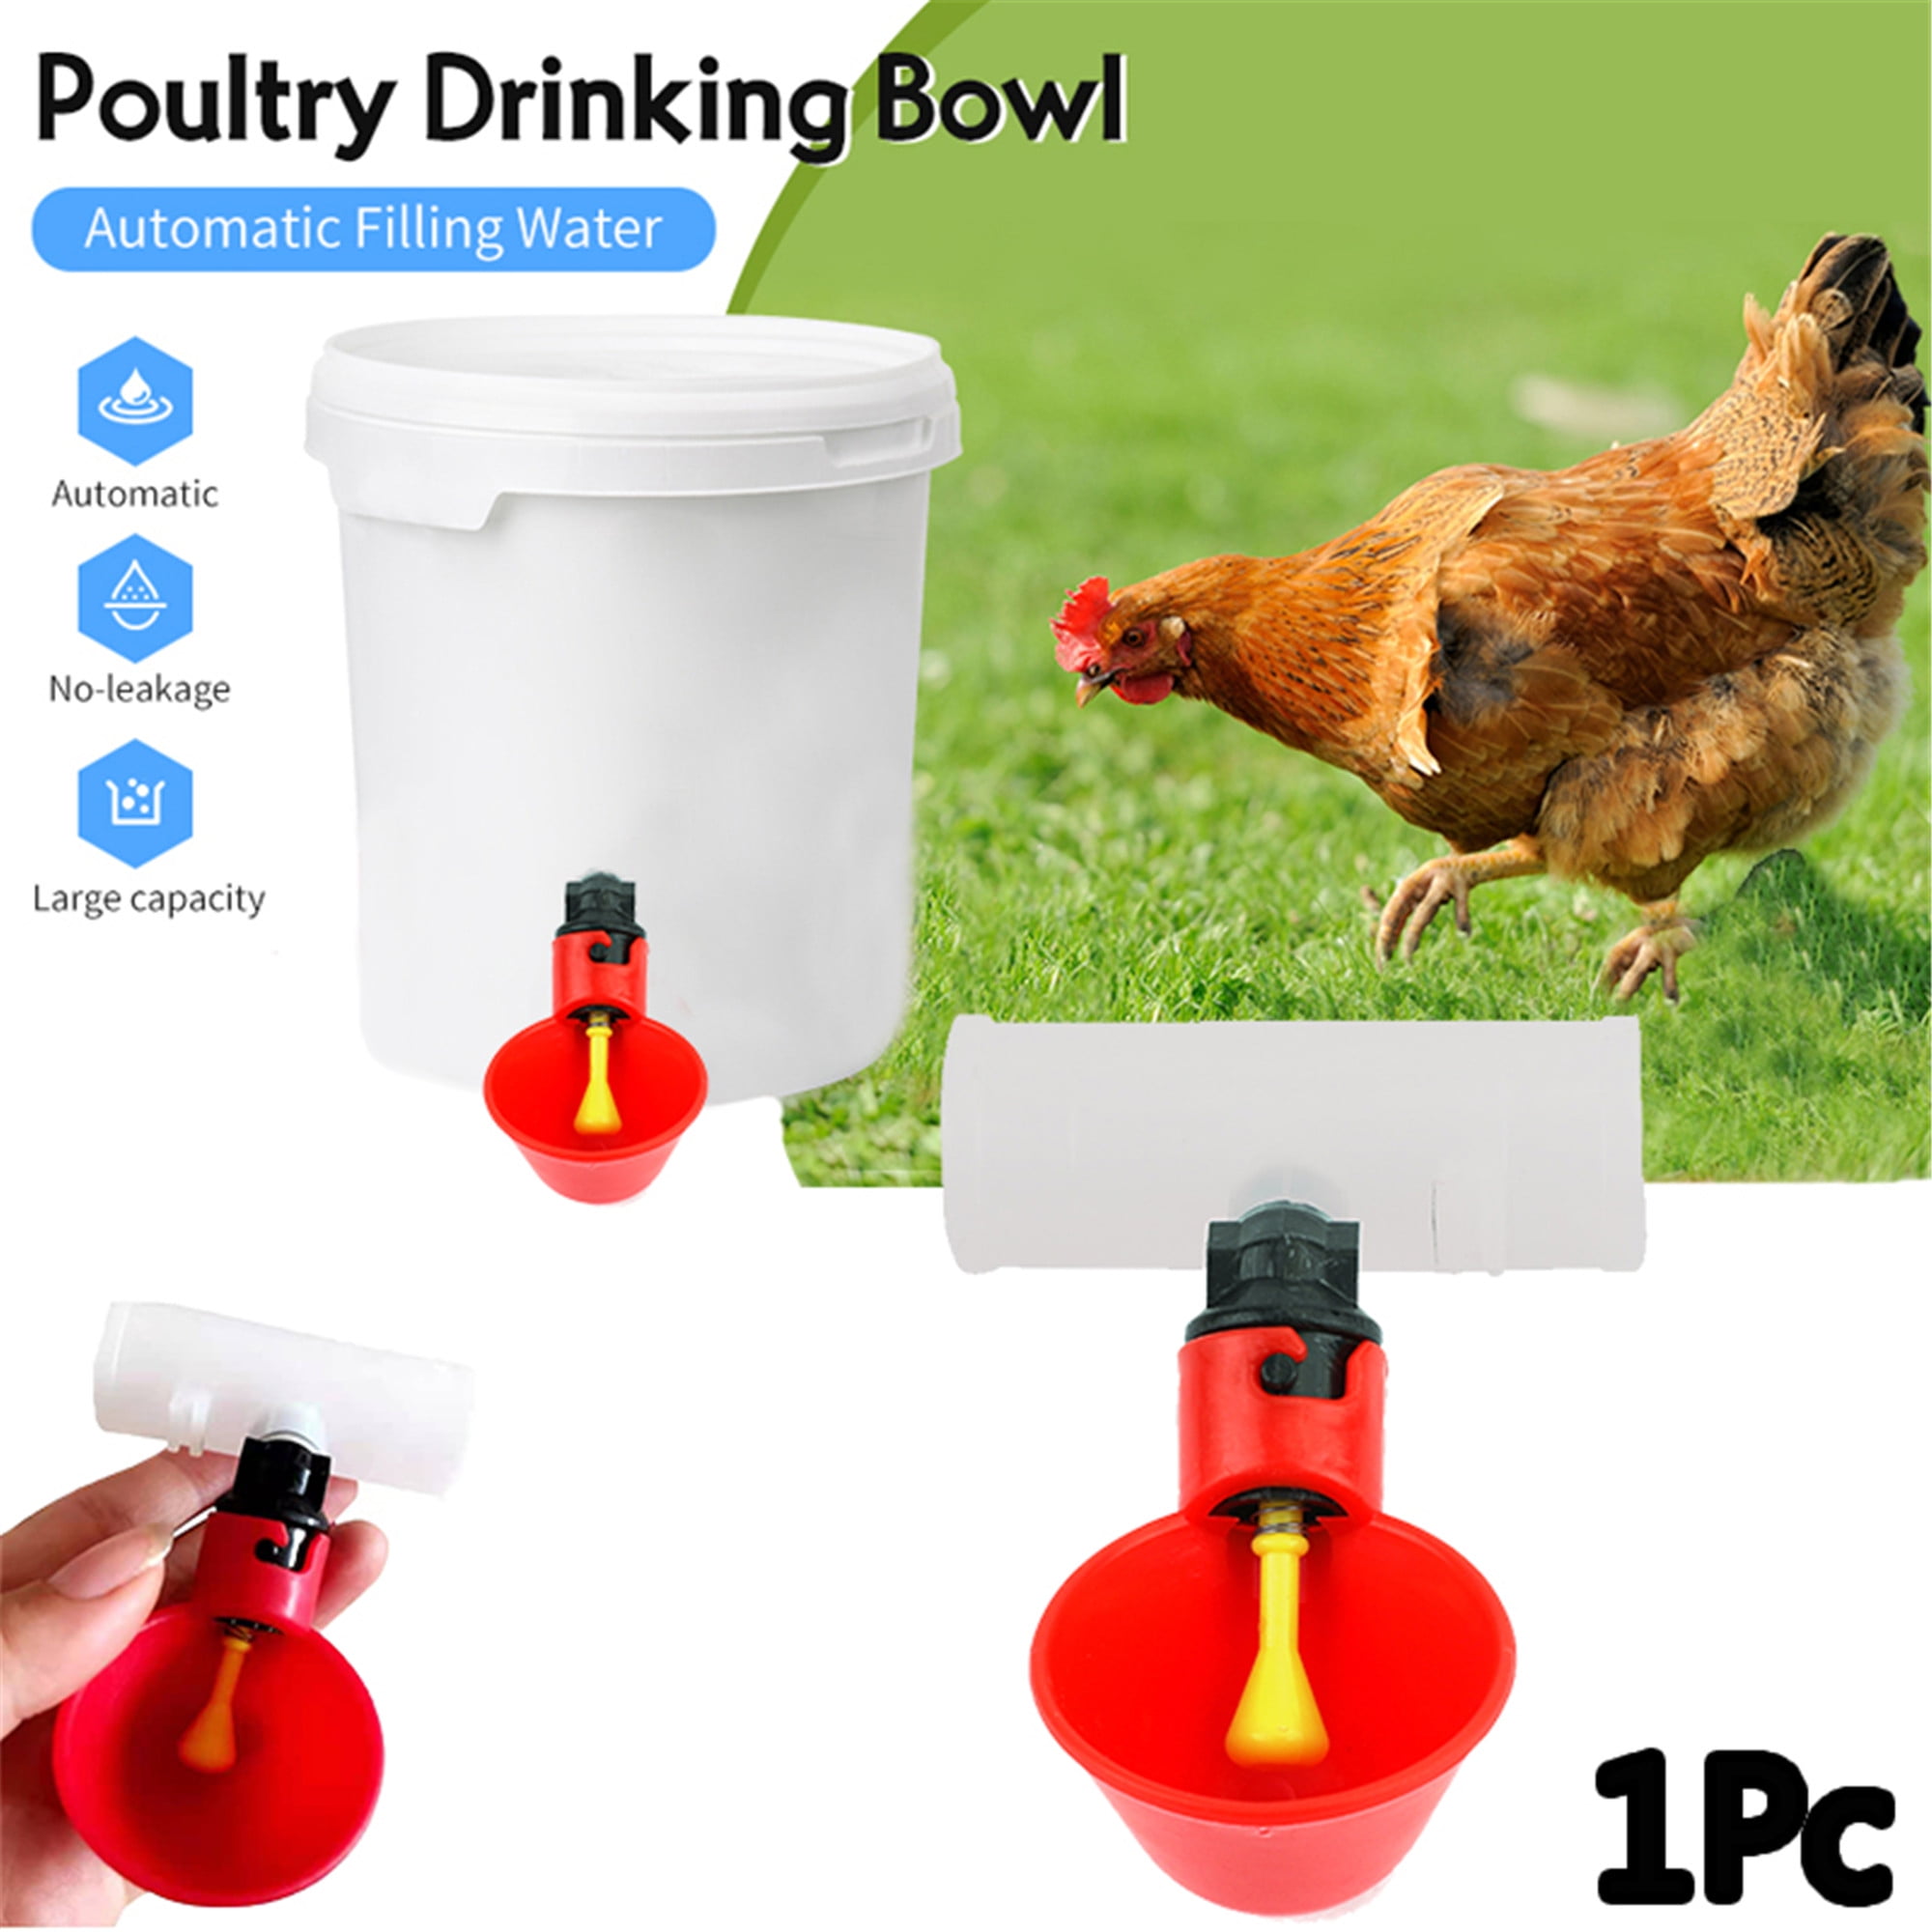 3 Poultry Drinking Nipples Tee PVC Pipe Fitting Chicken Farm Water Drinker New 